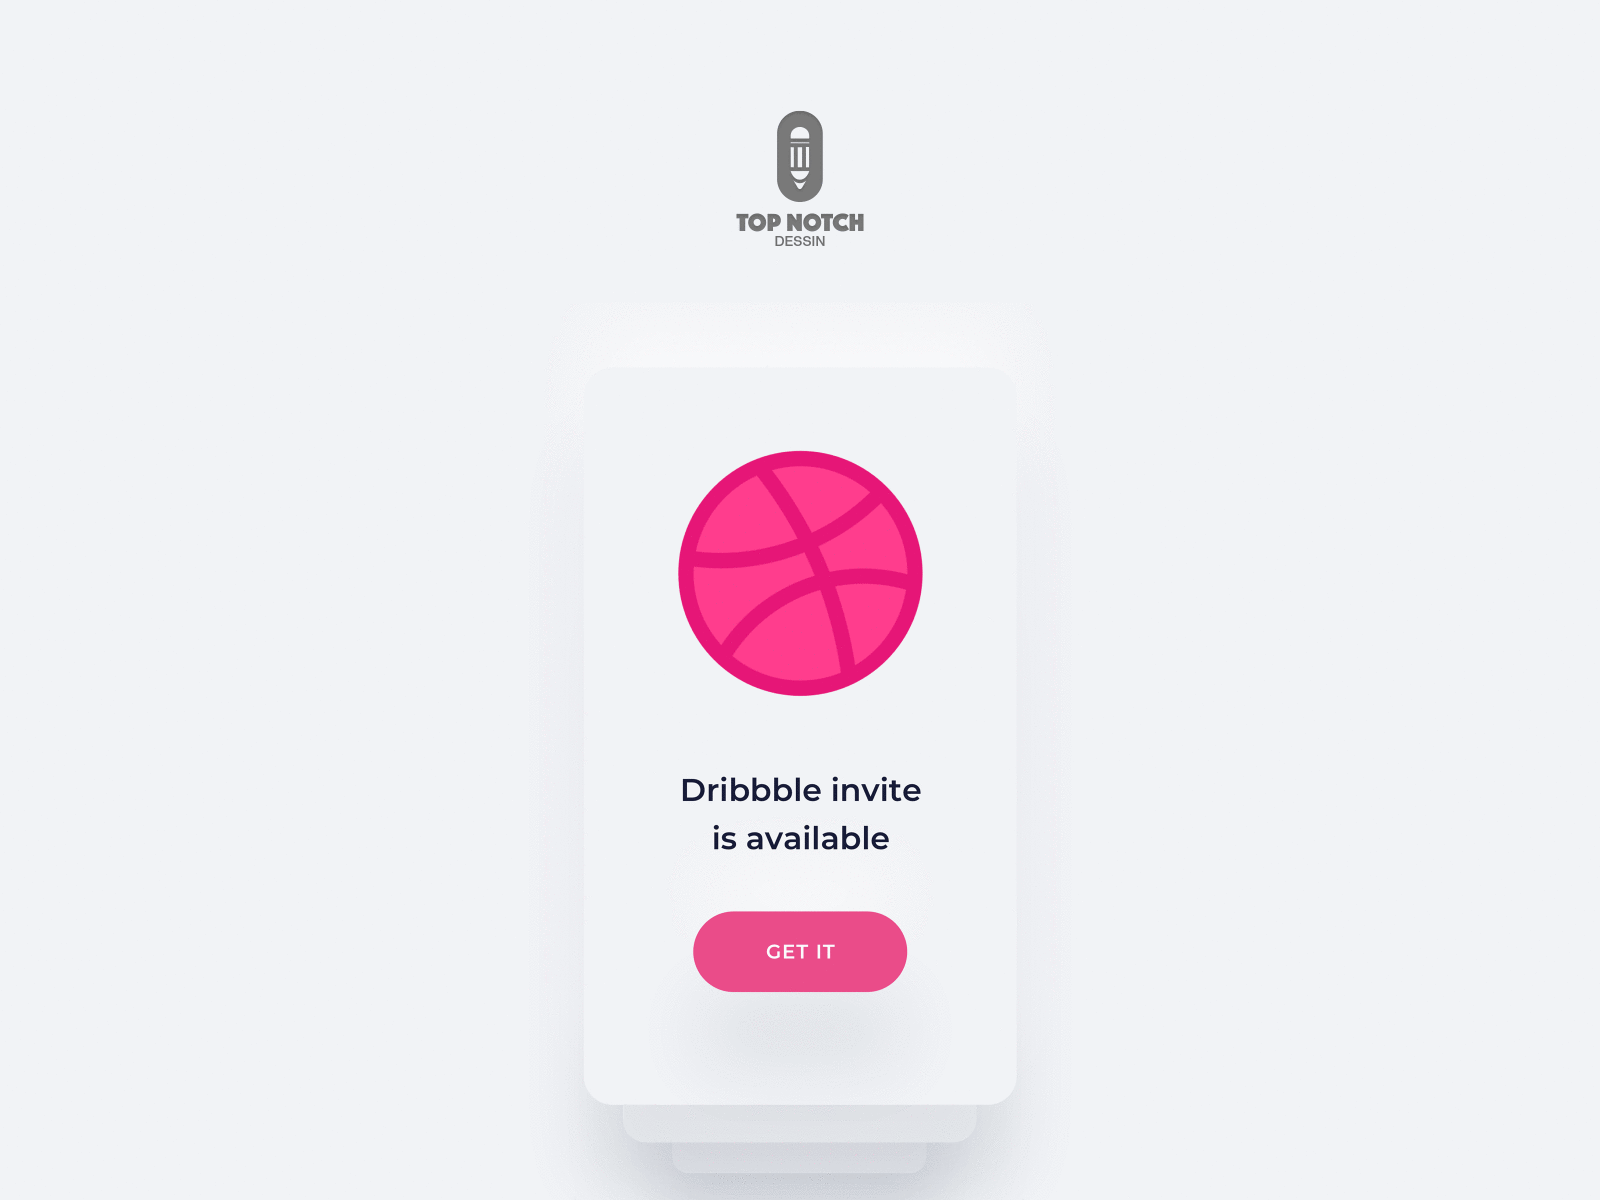 Dribbbble invite available best shot dribbble dribbble best shot dribbble invitation dribbble invite dribbbleweeklywarmup giveaway giveaways invite invite design invite giveaway invites invites giveaway